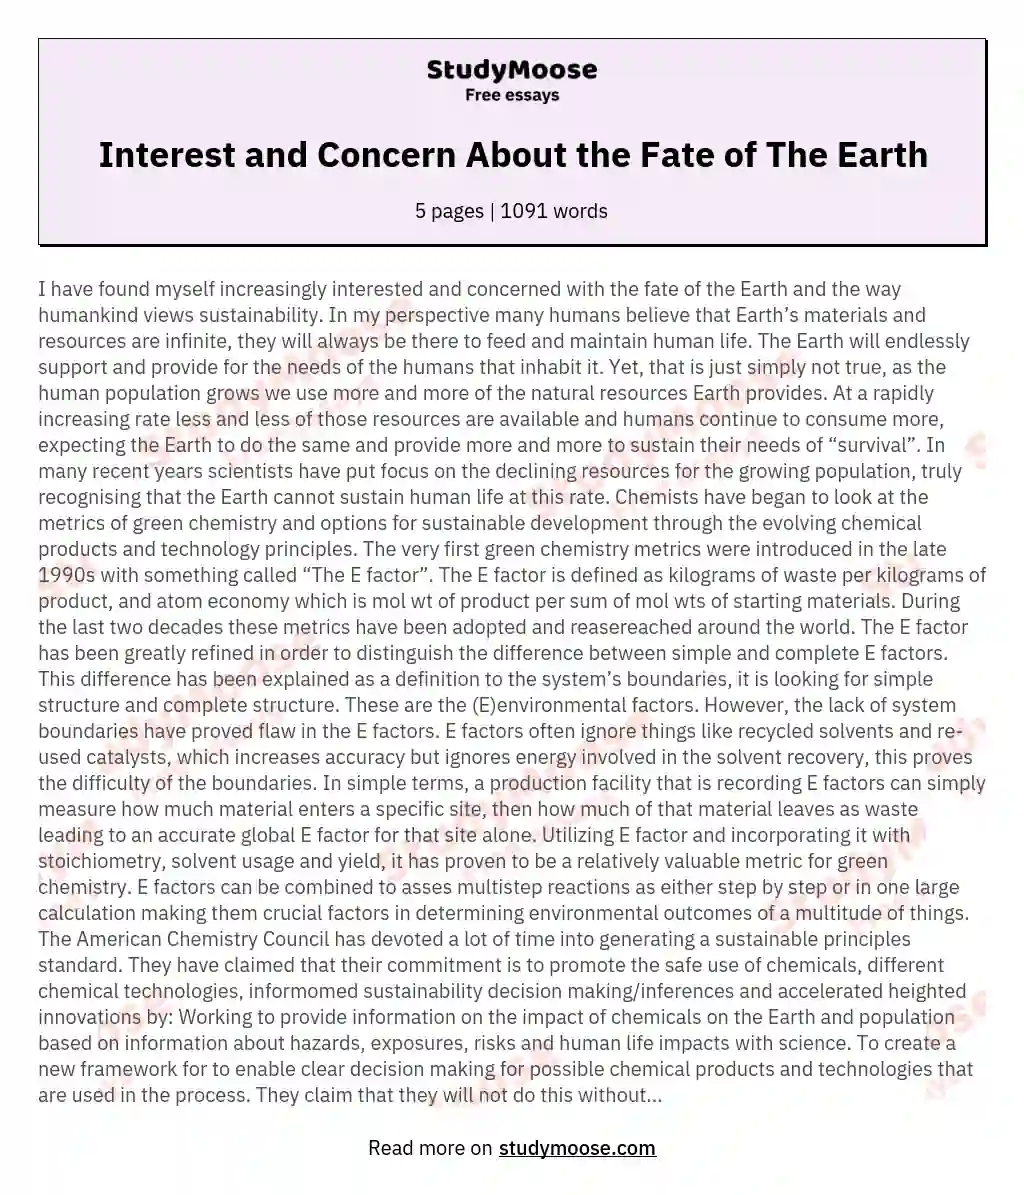 Interest and Concern About the Fate of The Earth essay